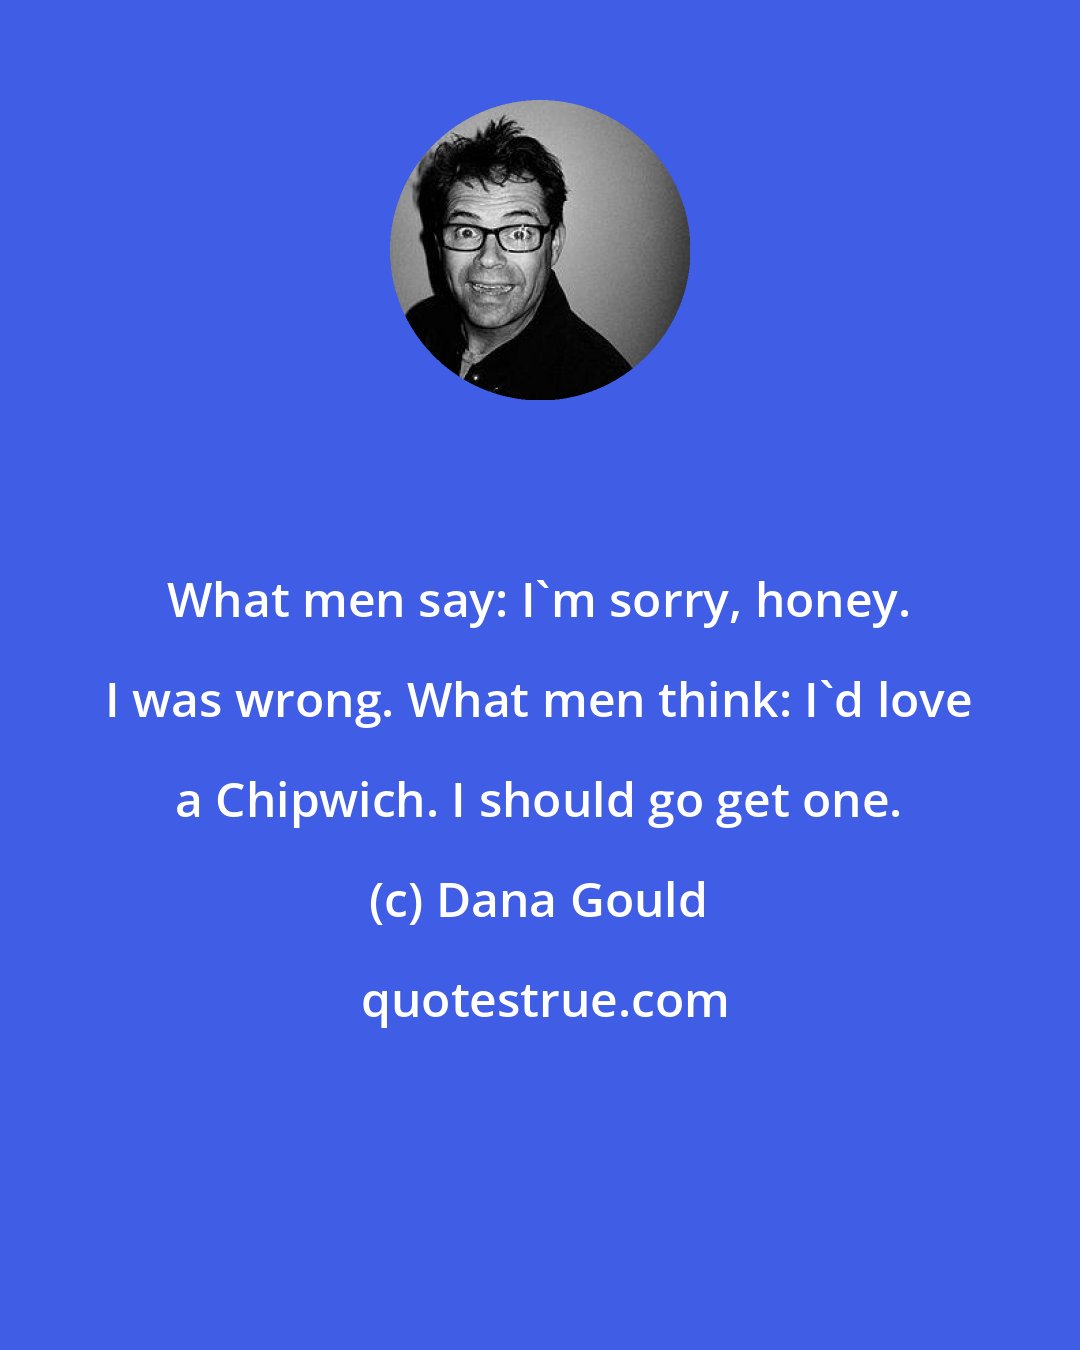 Dana Gould: What men say: I'm sorry, honey. I was wrong. What men think: I'd love a Chipwich. I should go get one.